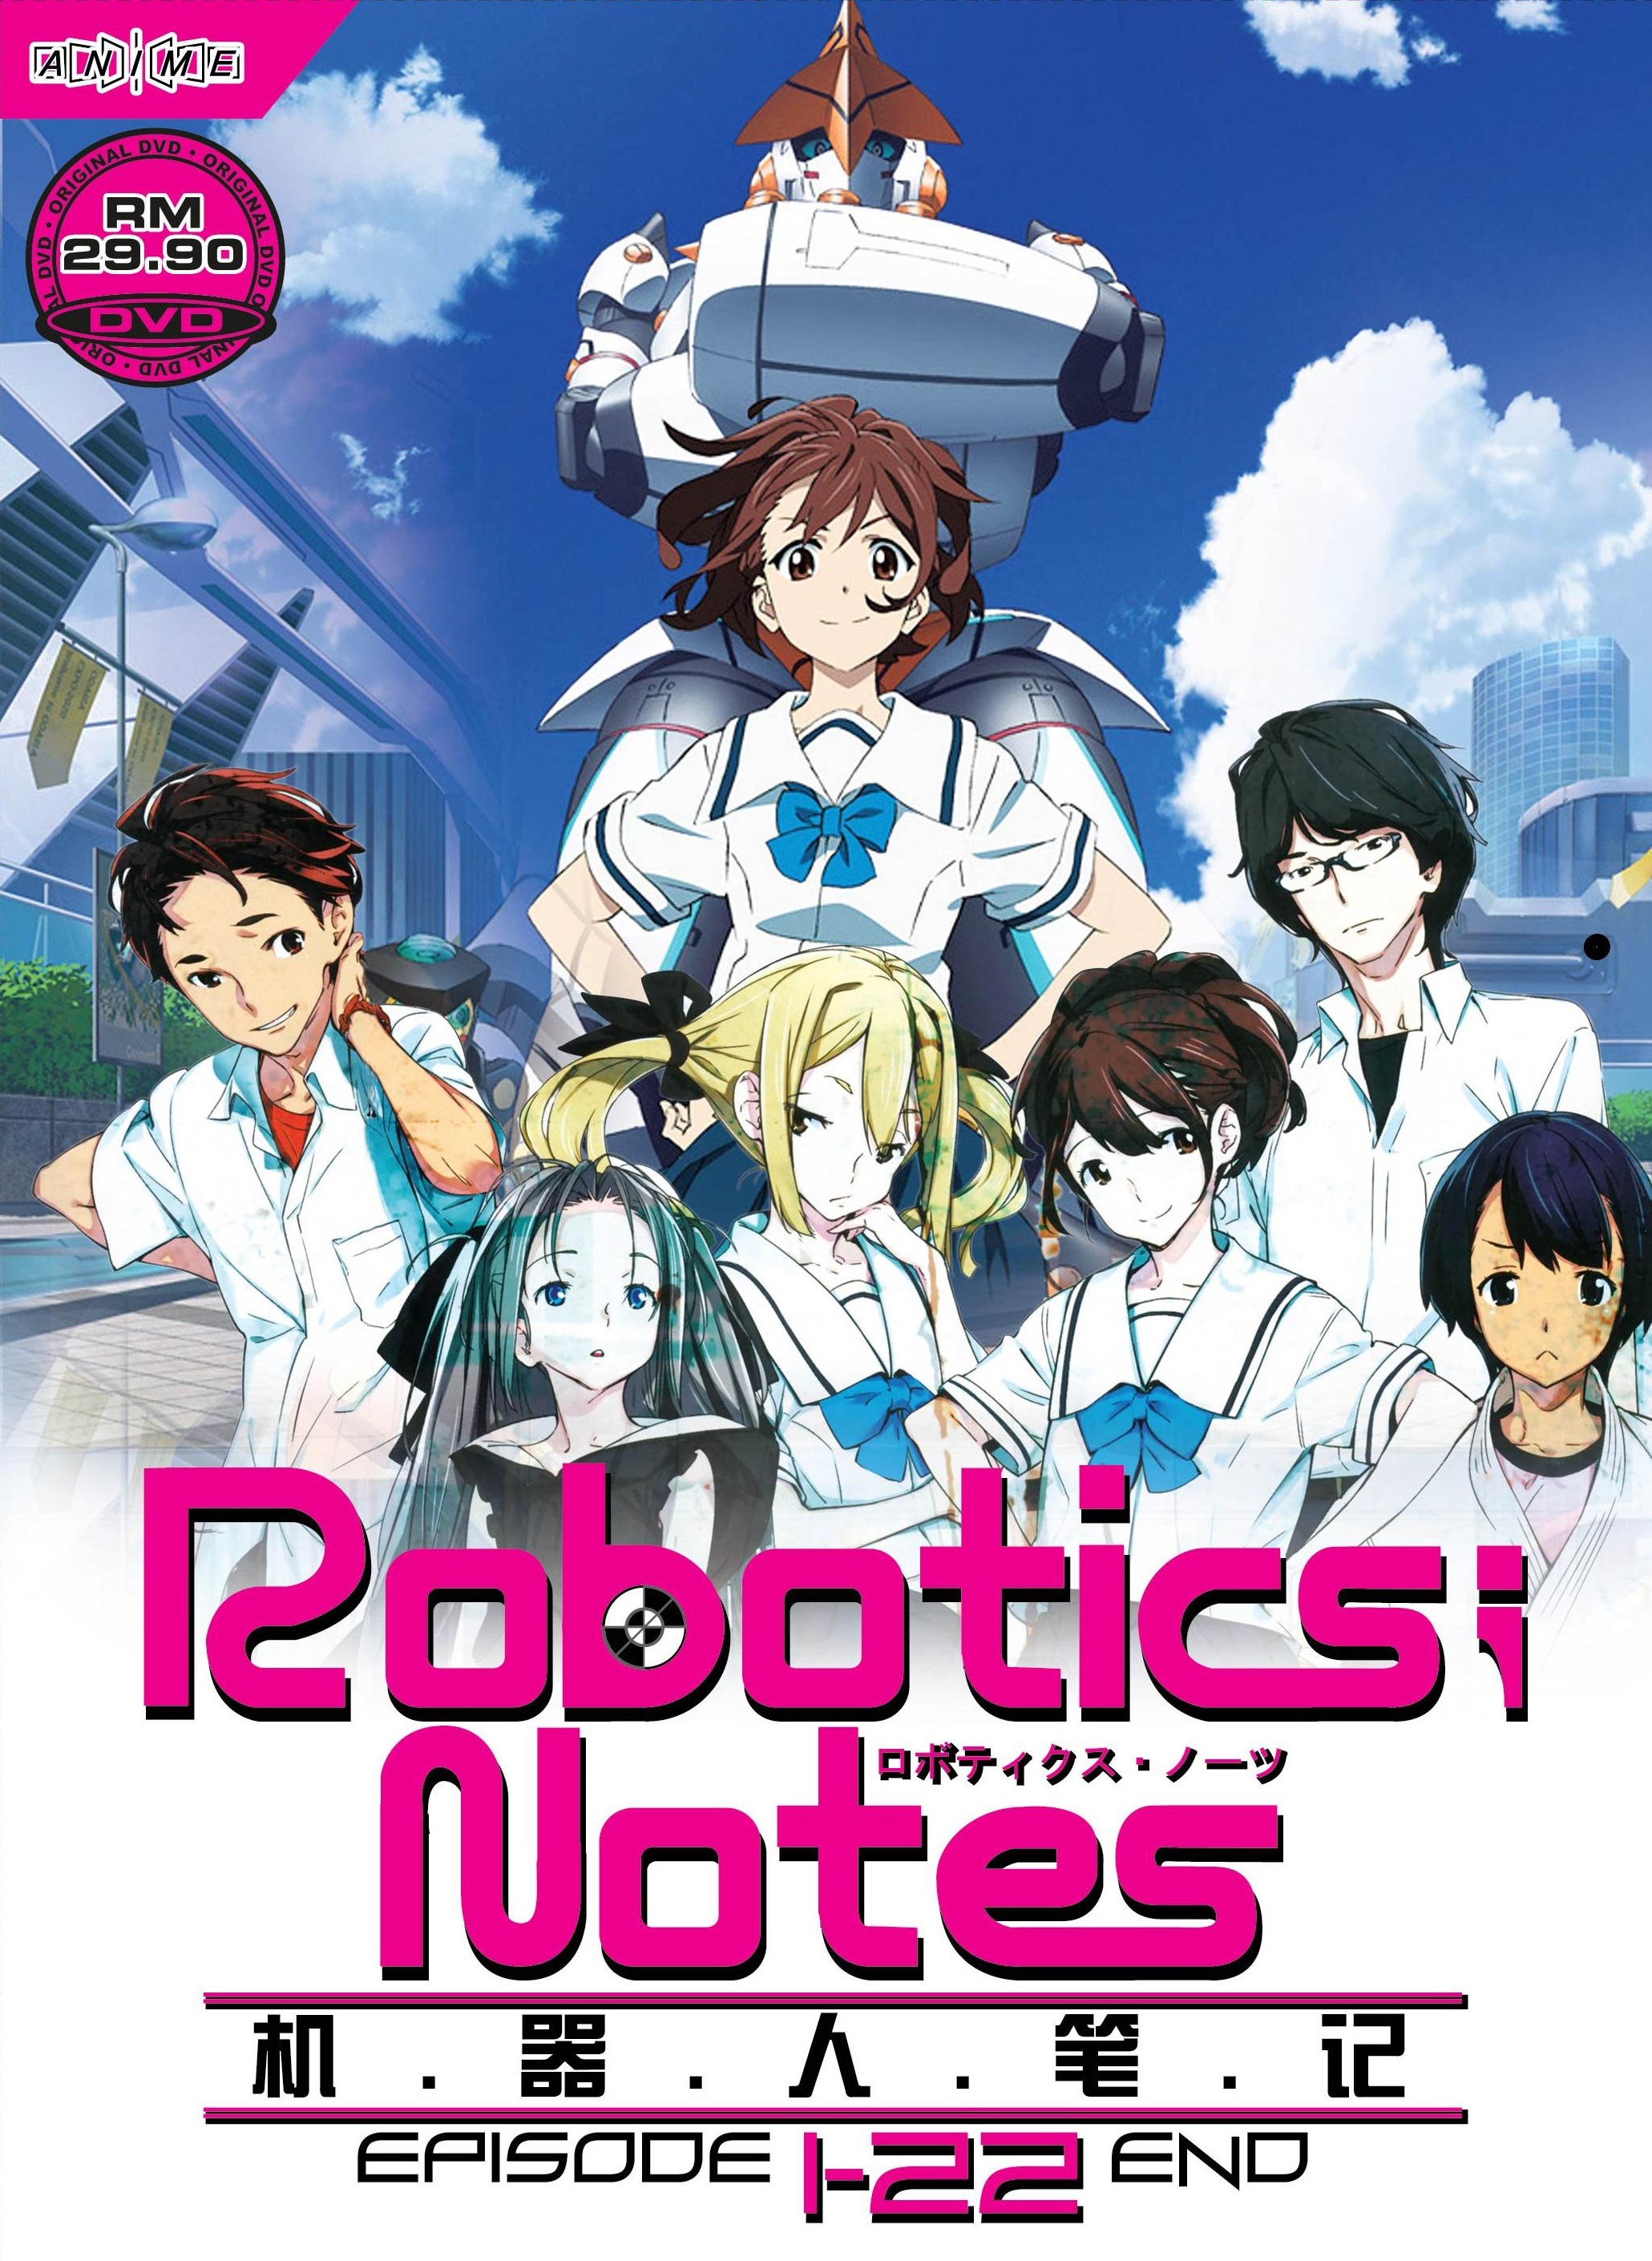 Anime review RoboticsNotes Collection 1 DVD  Digitally Downloaded